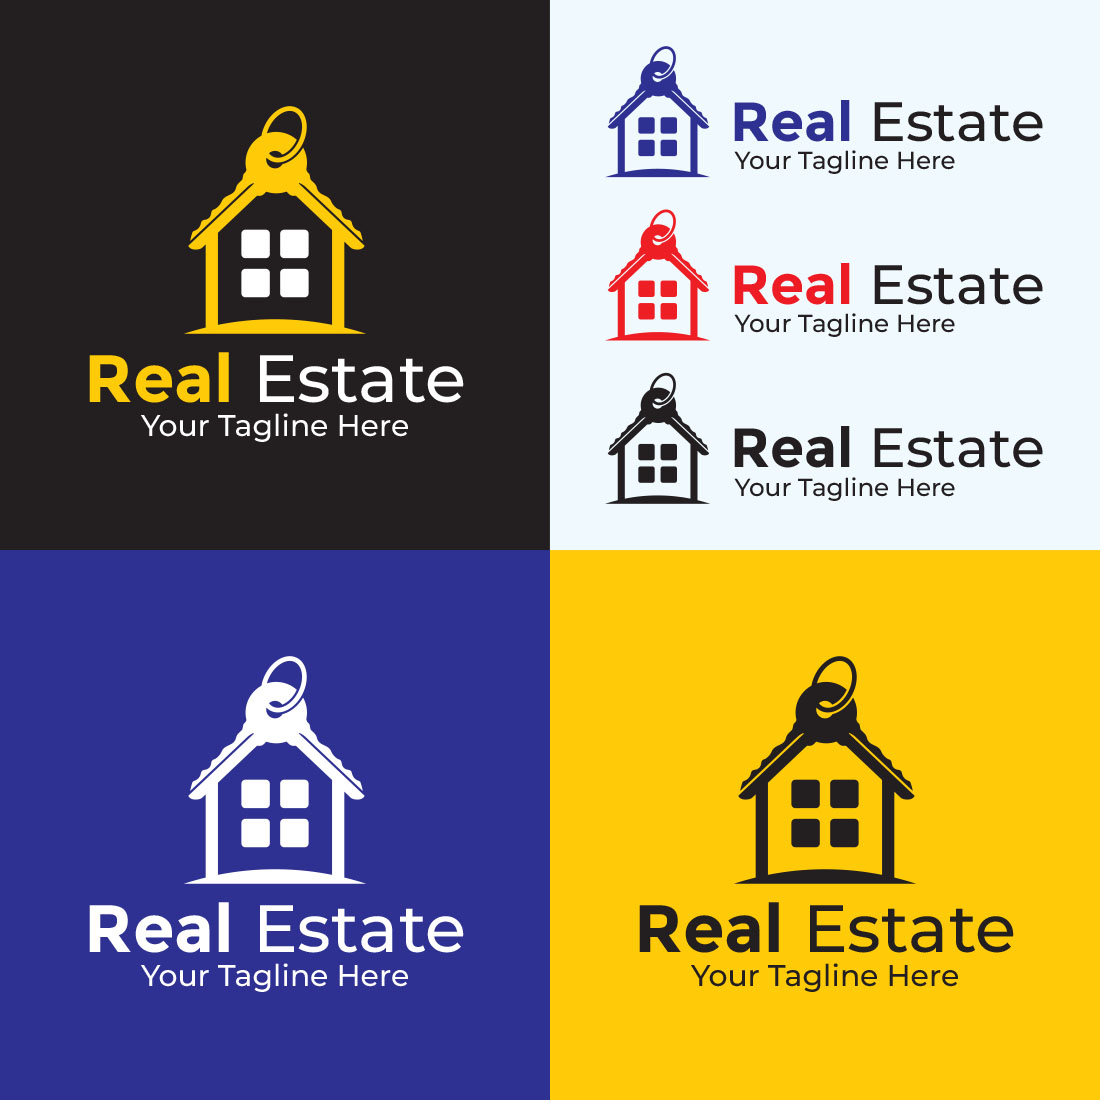 House with Key Real Estate Logo Design cover image.